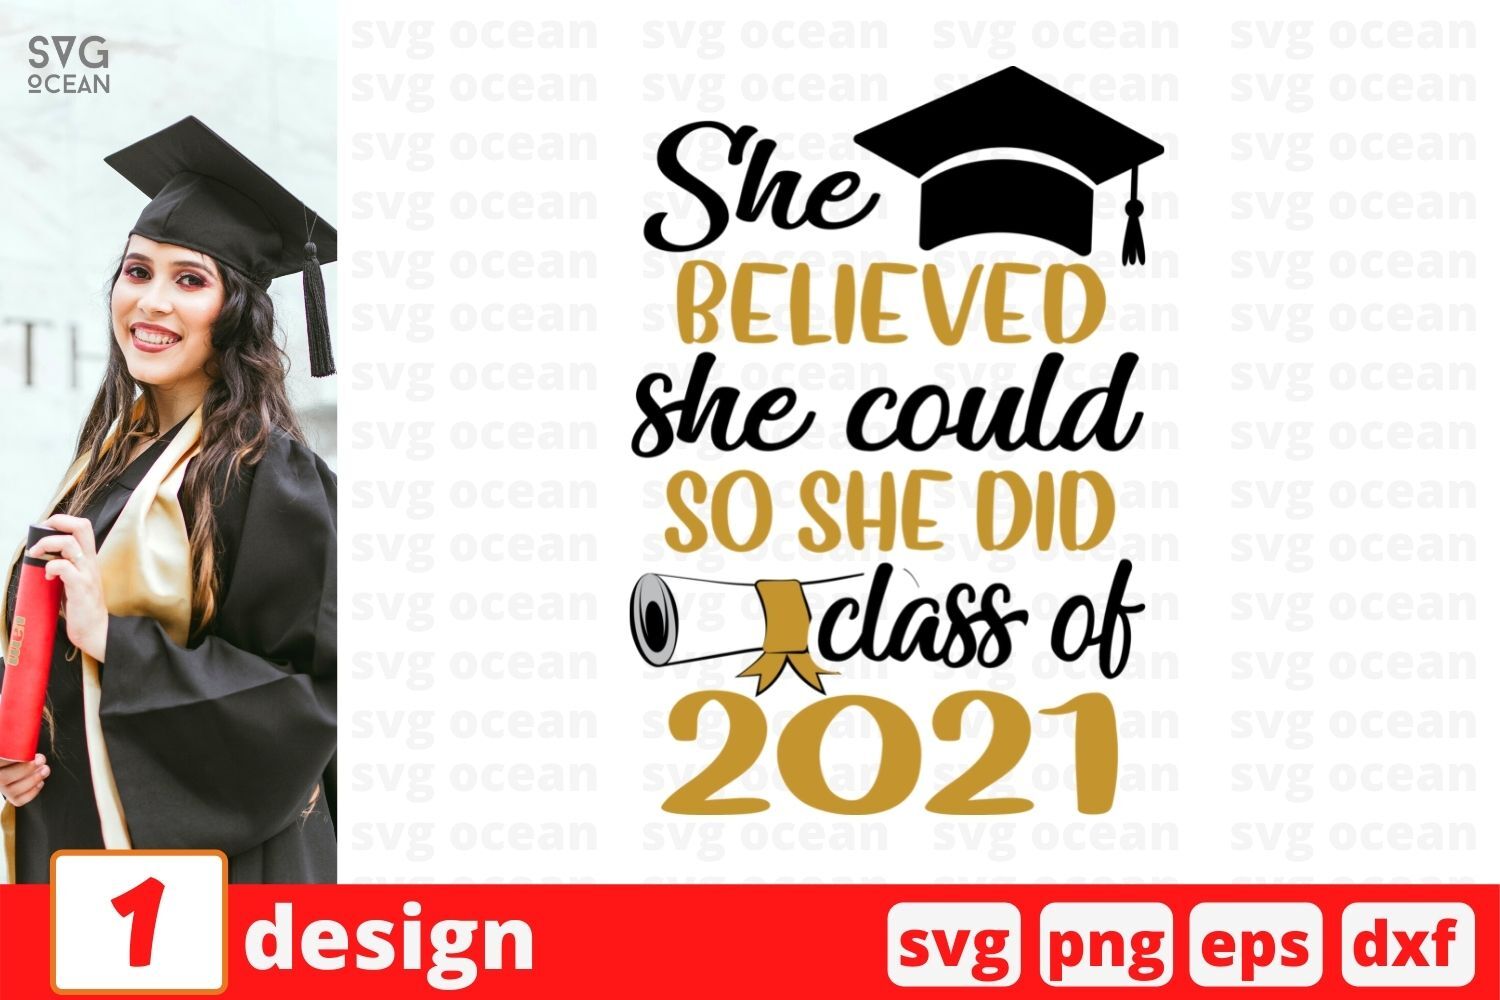 She Believed She Could So She Did Class Of 2021 Svg Cut File By Svgocean Thehungryjpeg Com